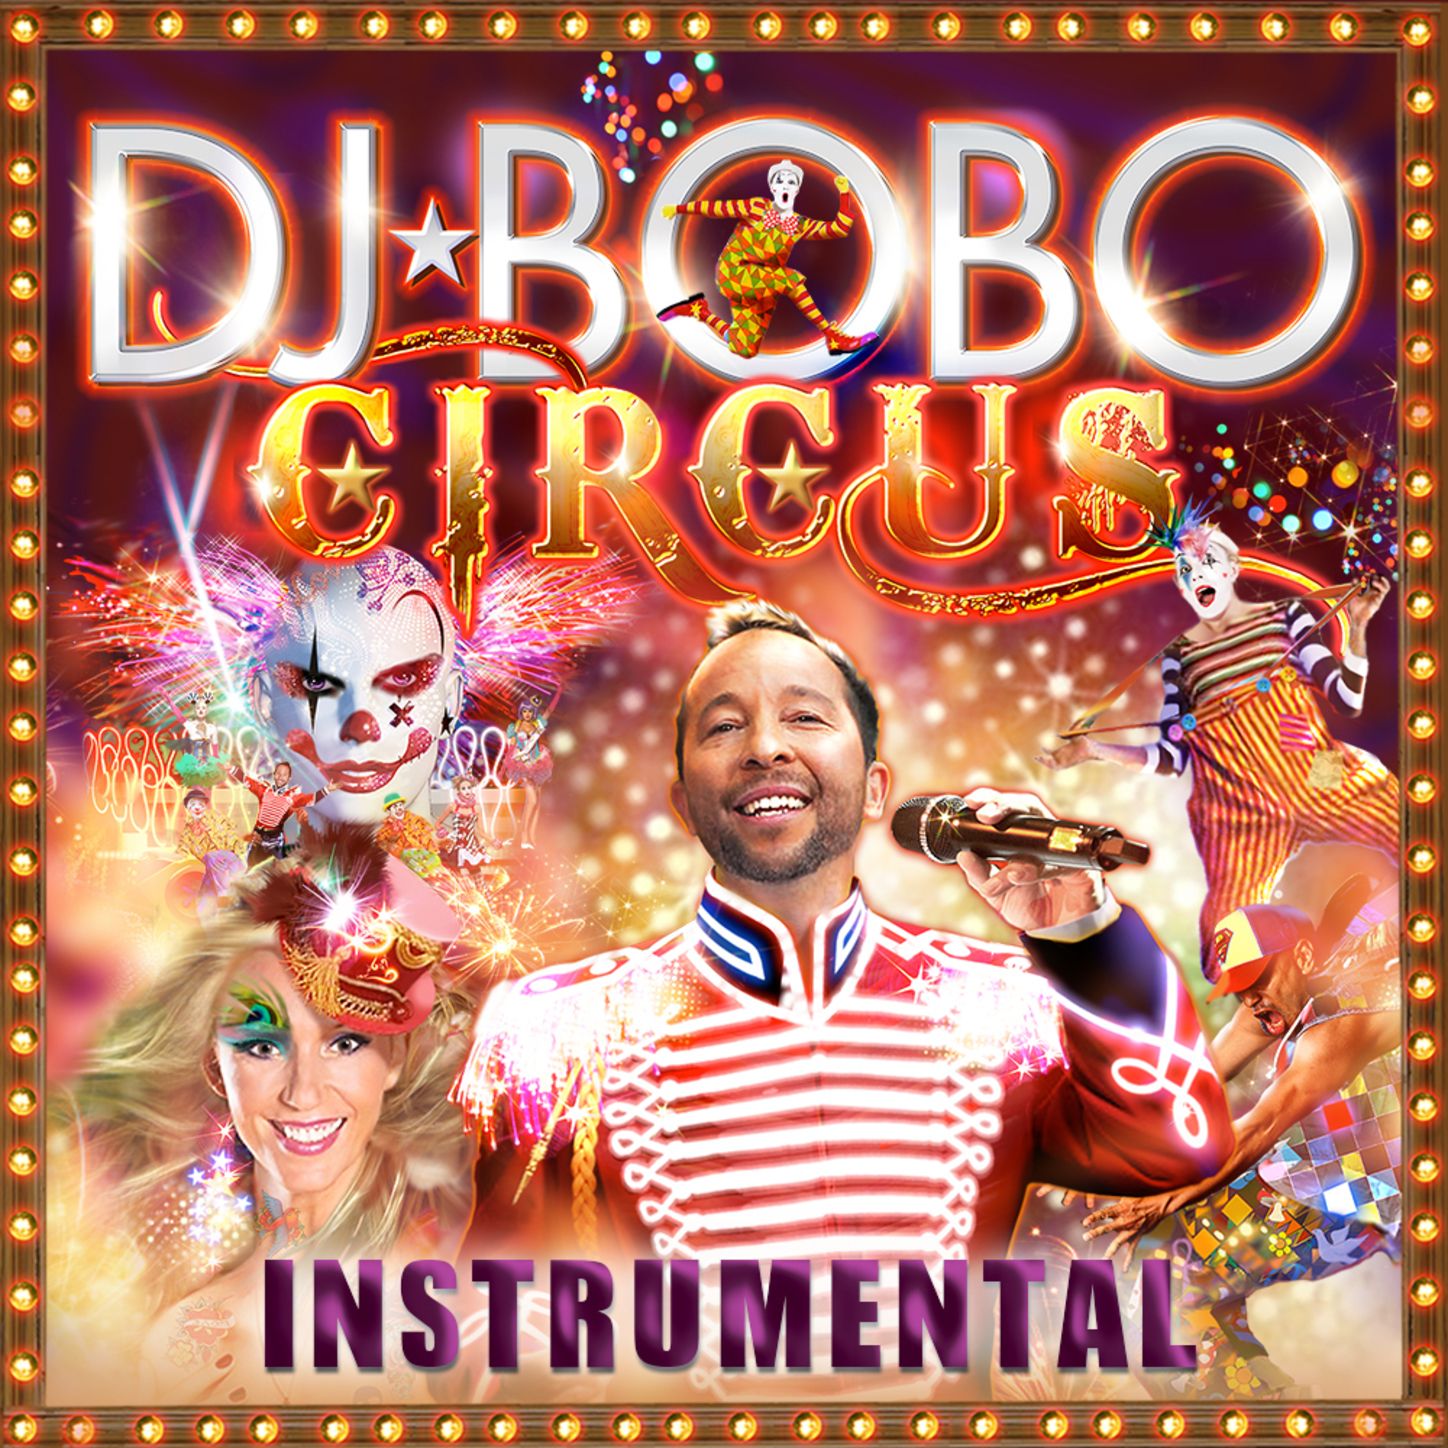 Welcome to My Crazy Circus (Instrumental Version)